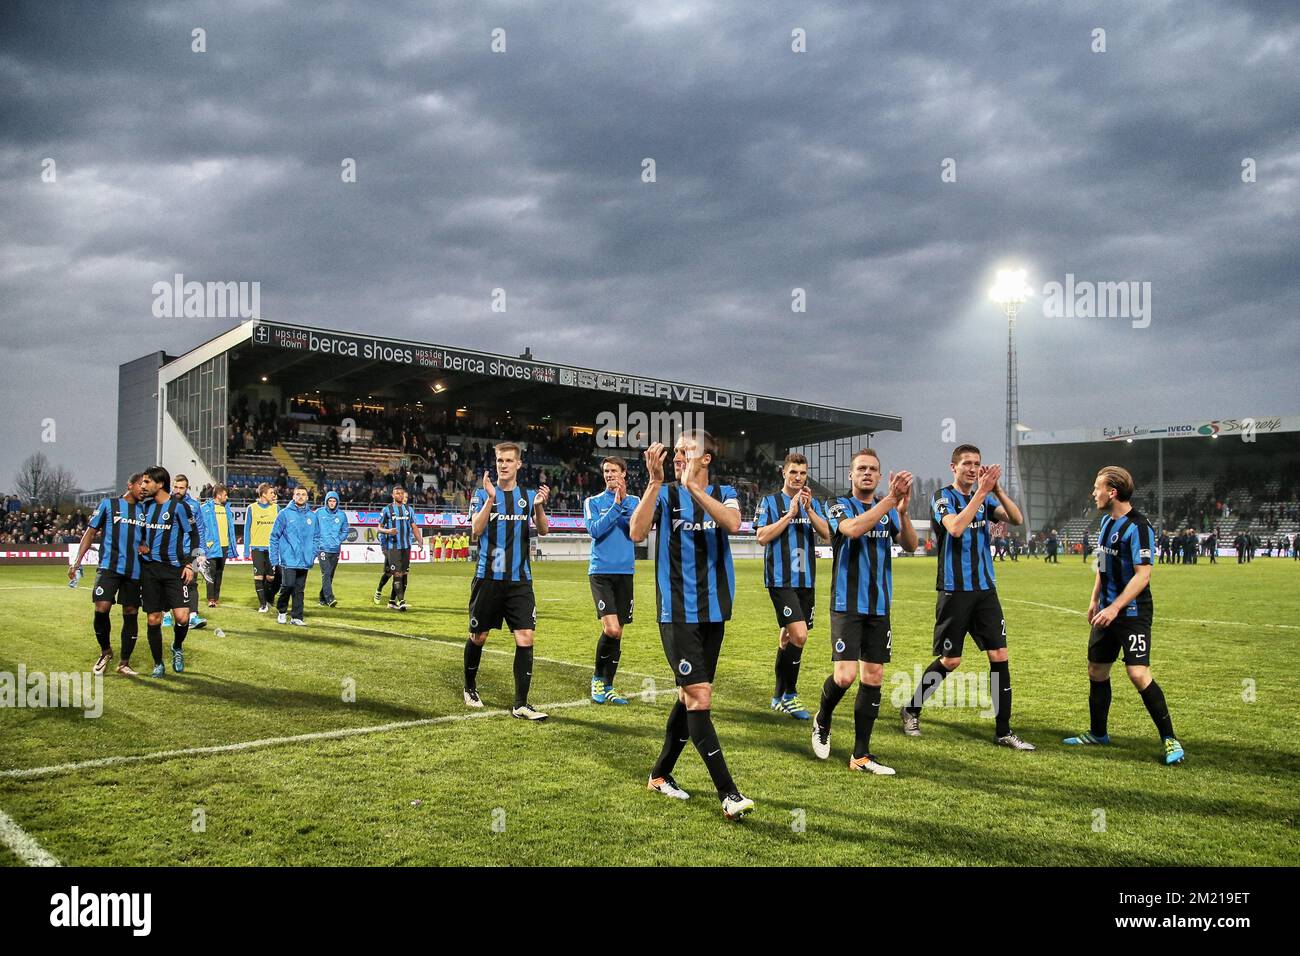 Club's players celebrate after winning the Jupiler Pro League match between  KV Oostende and Club Brugge,